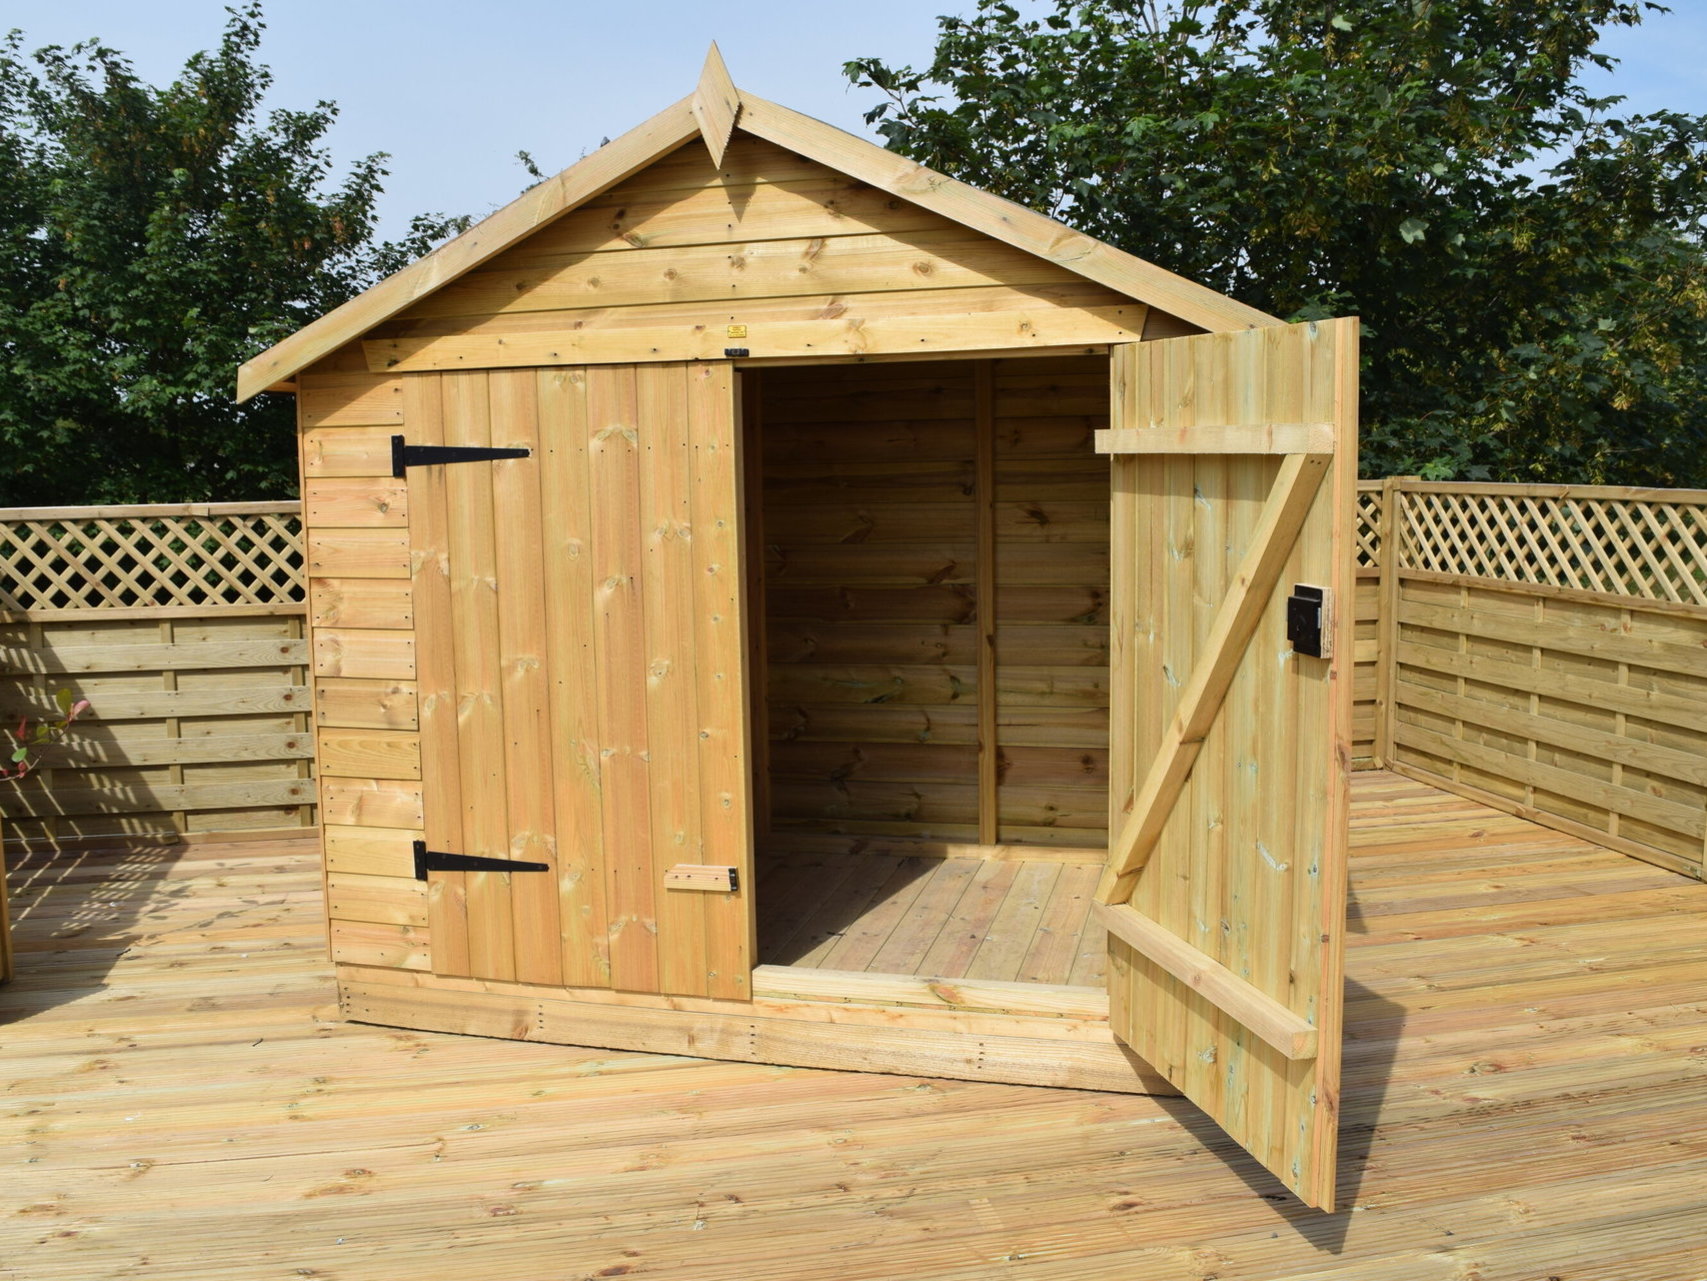 A brand new shed on decking in the garden